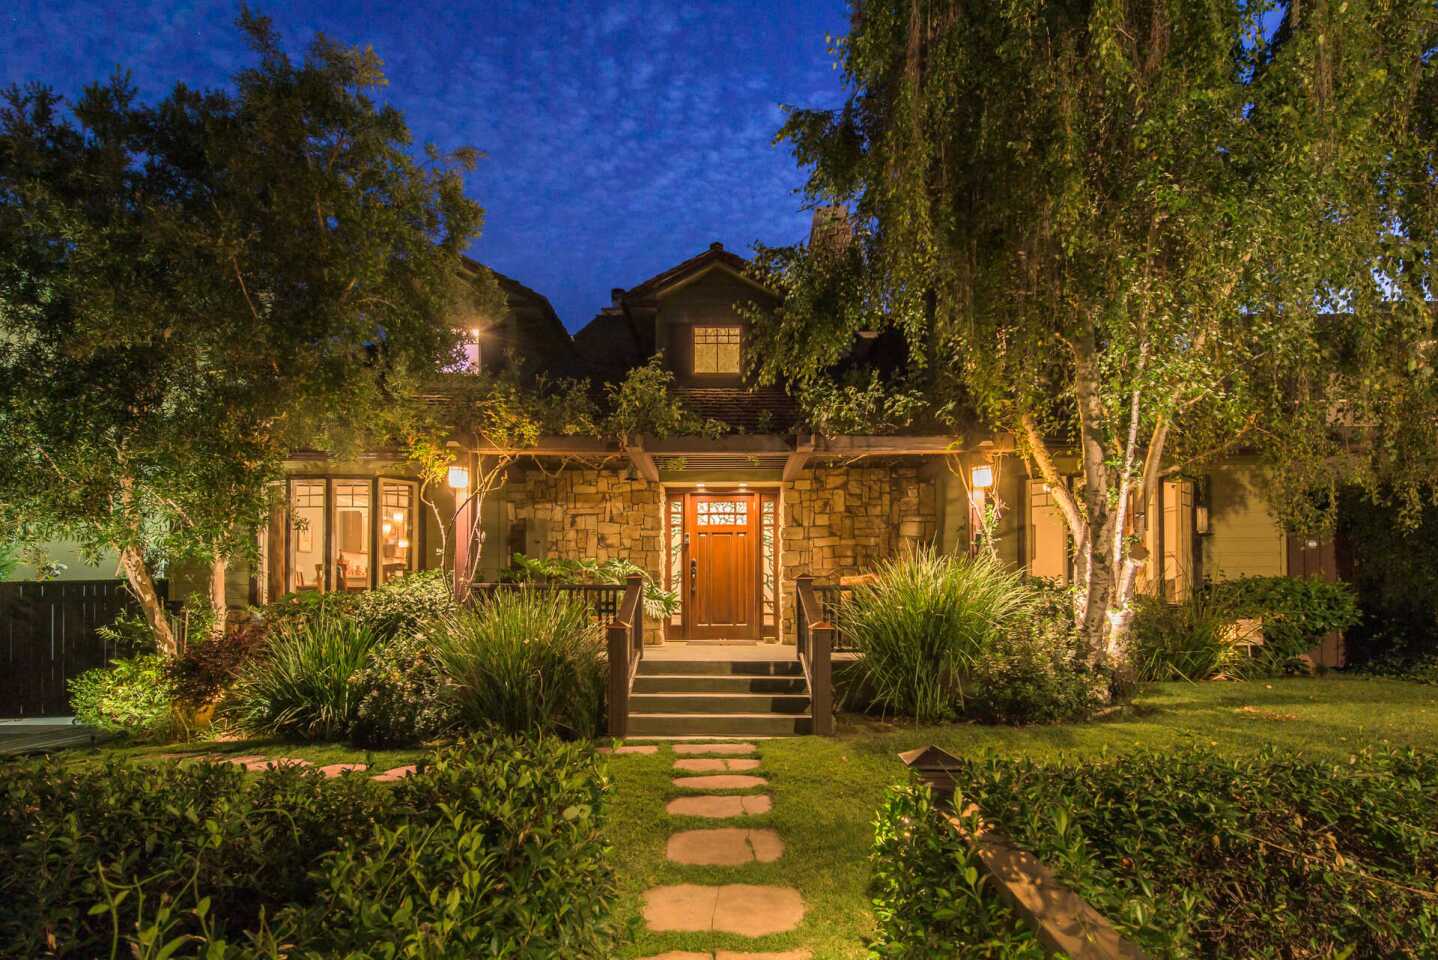 Karen Sillas and Ivan Menchell's Brentwood home